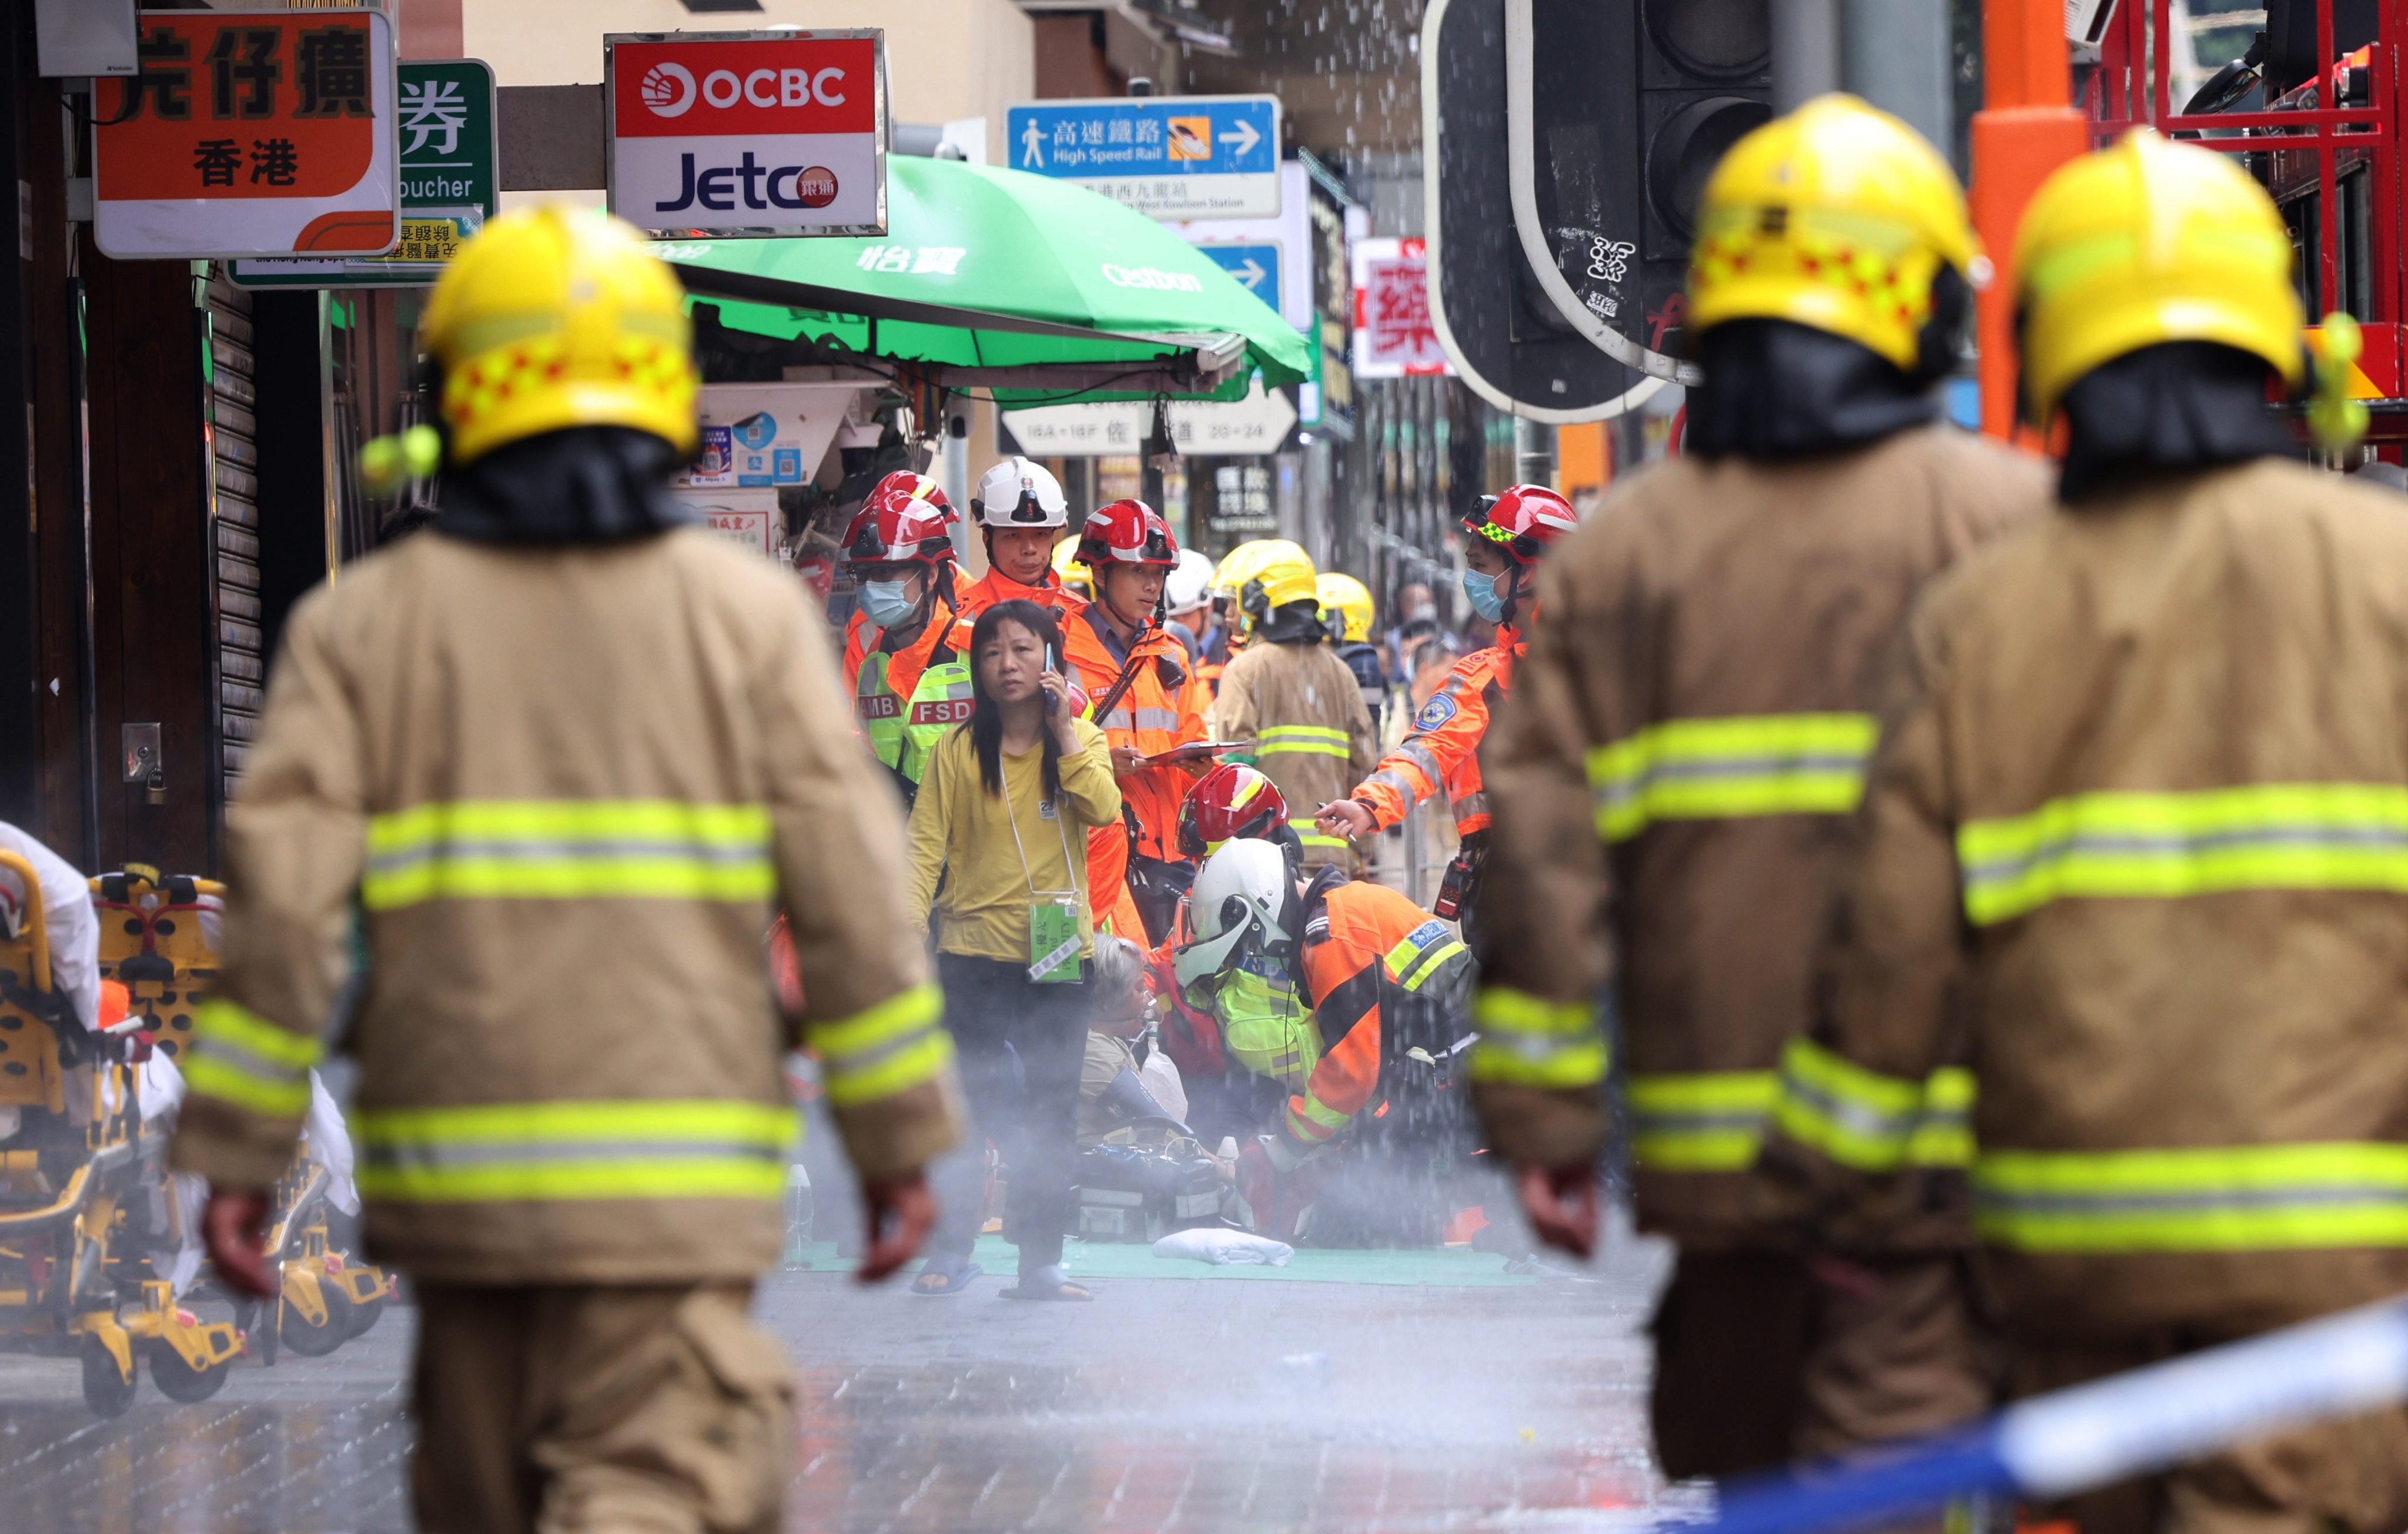 Firefighters and parademics outside New Lucky House at the junction of Jordan Road and Nathan Road on April 10. Photo: Jelly Tse